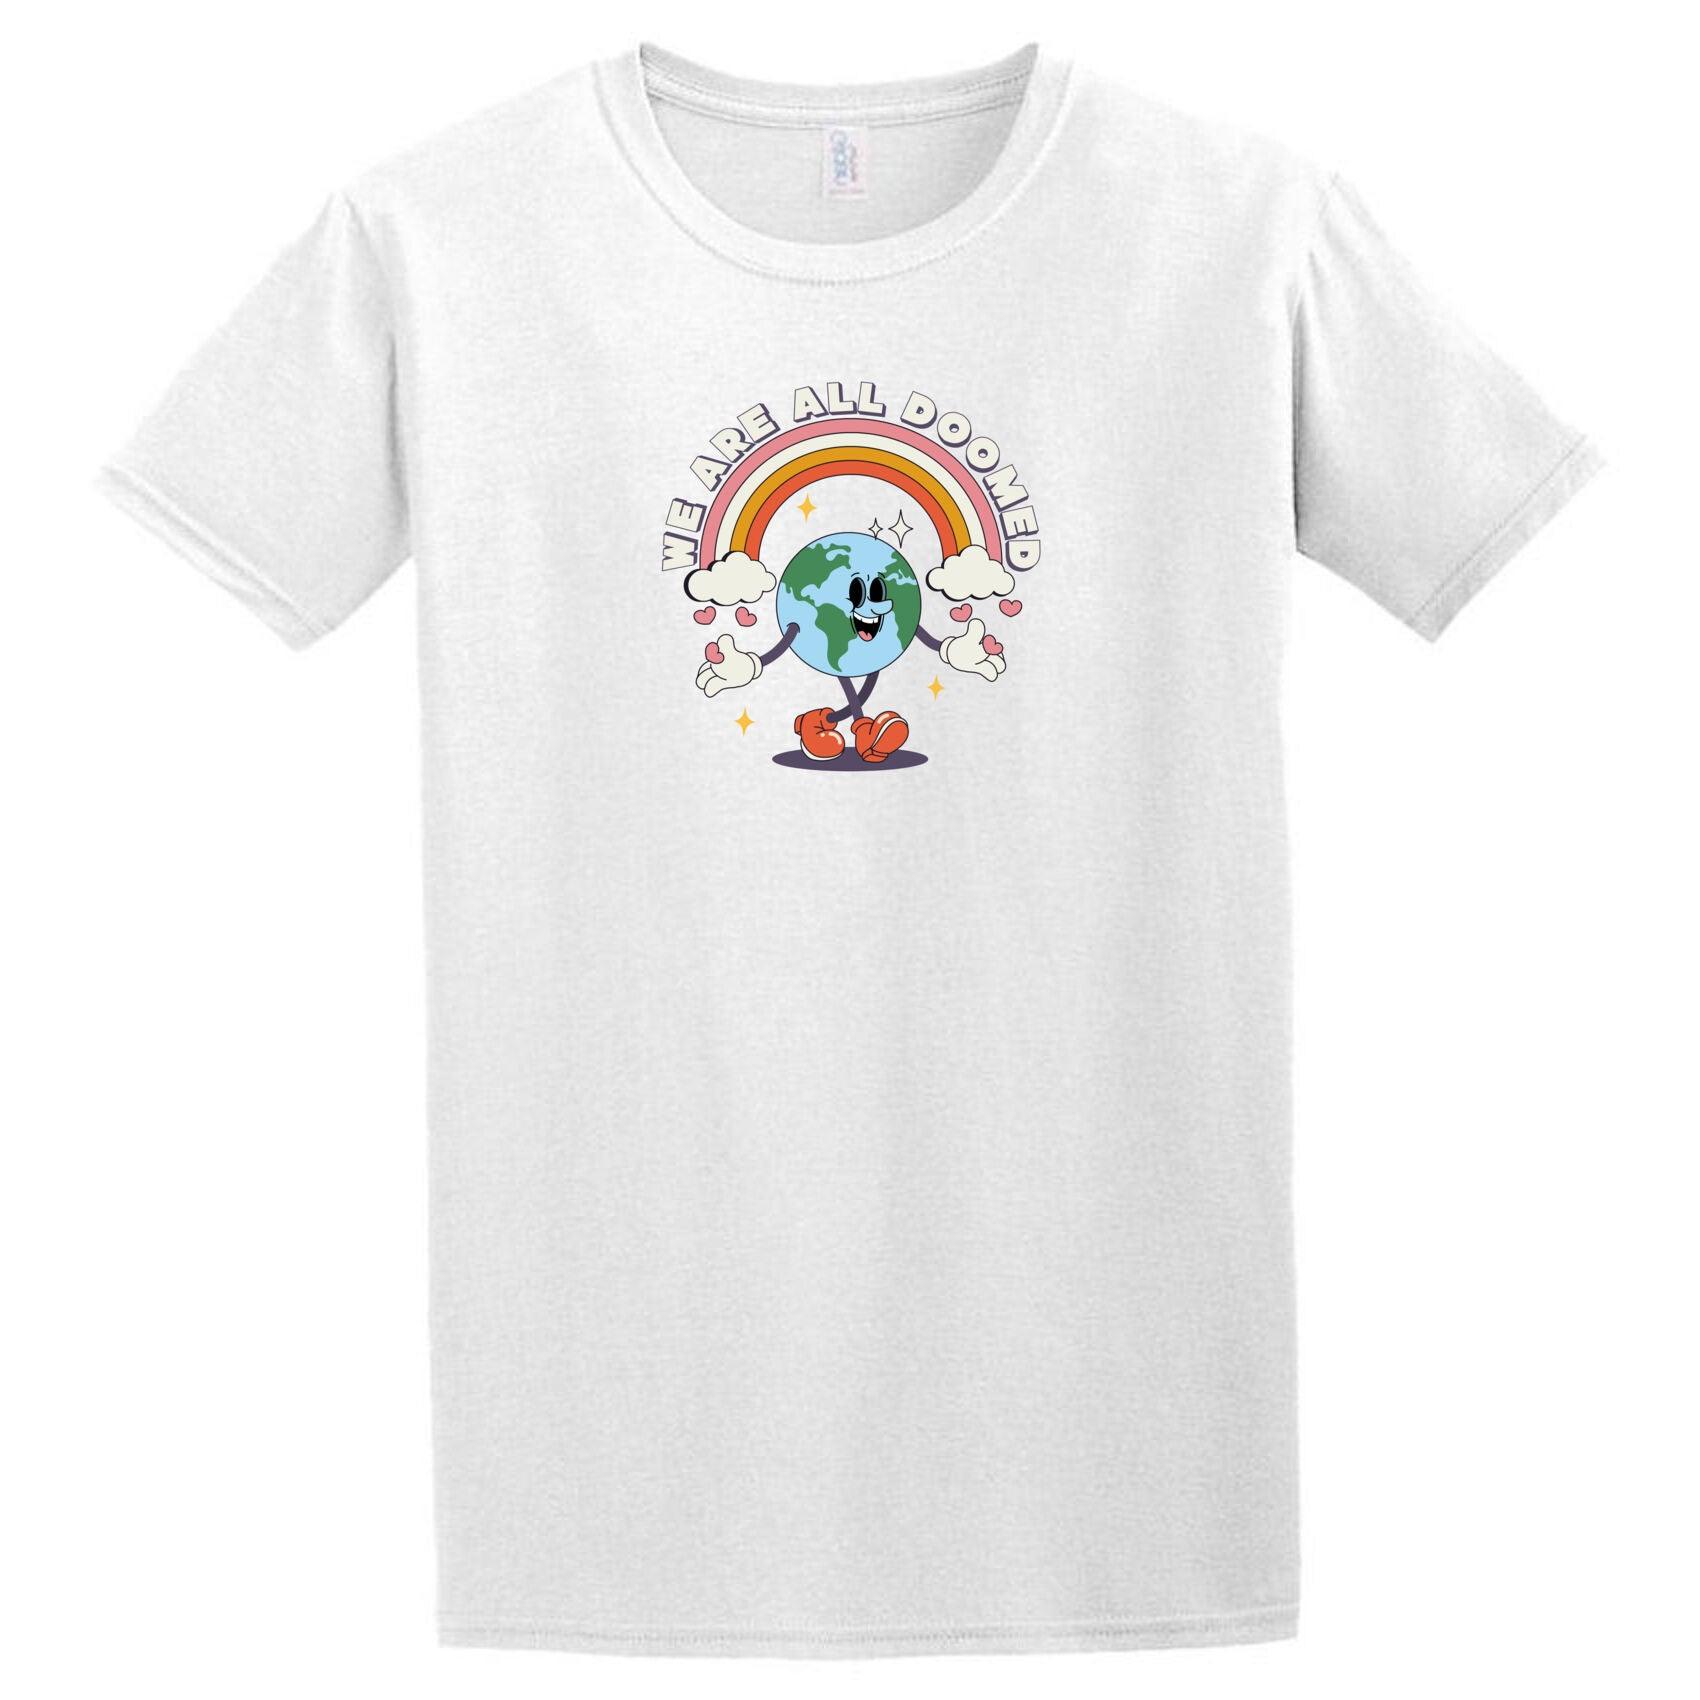 A Doomed T-Shirt from Twisted Gifts with an image of a man with a rainbow on his head.